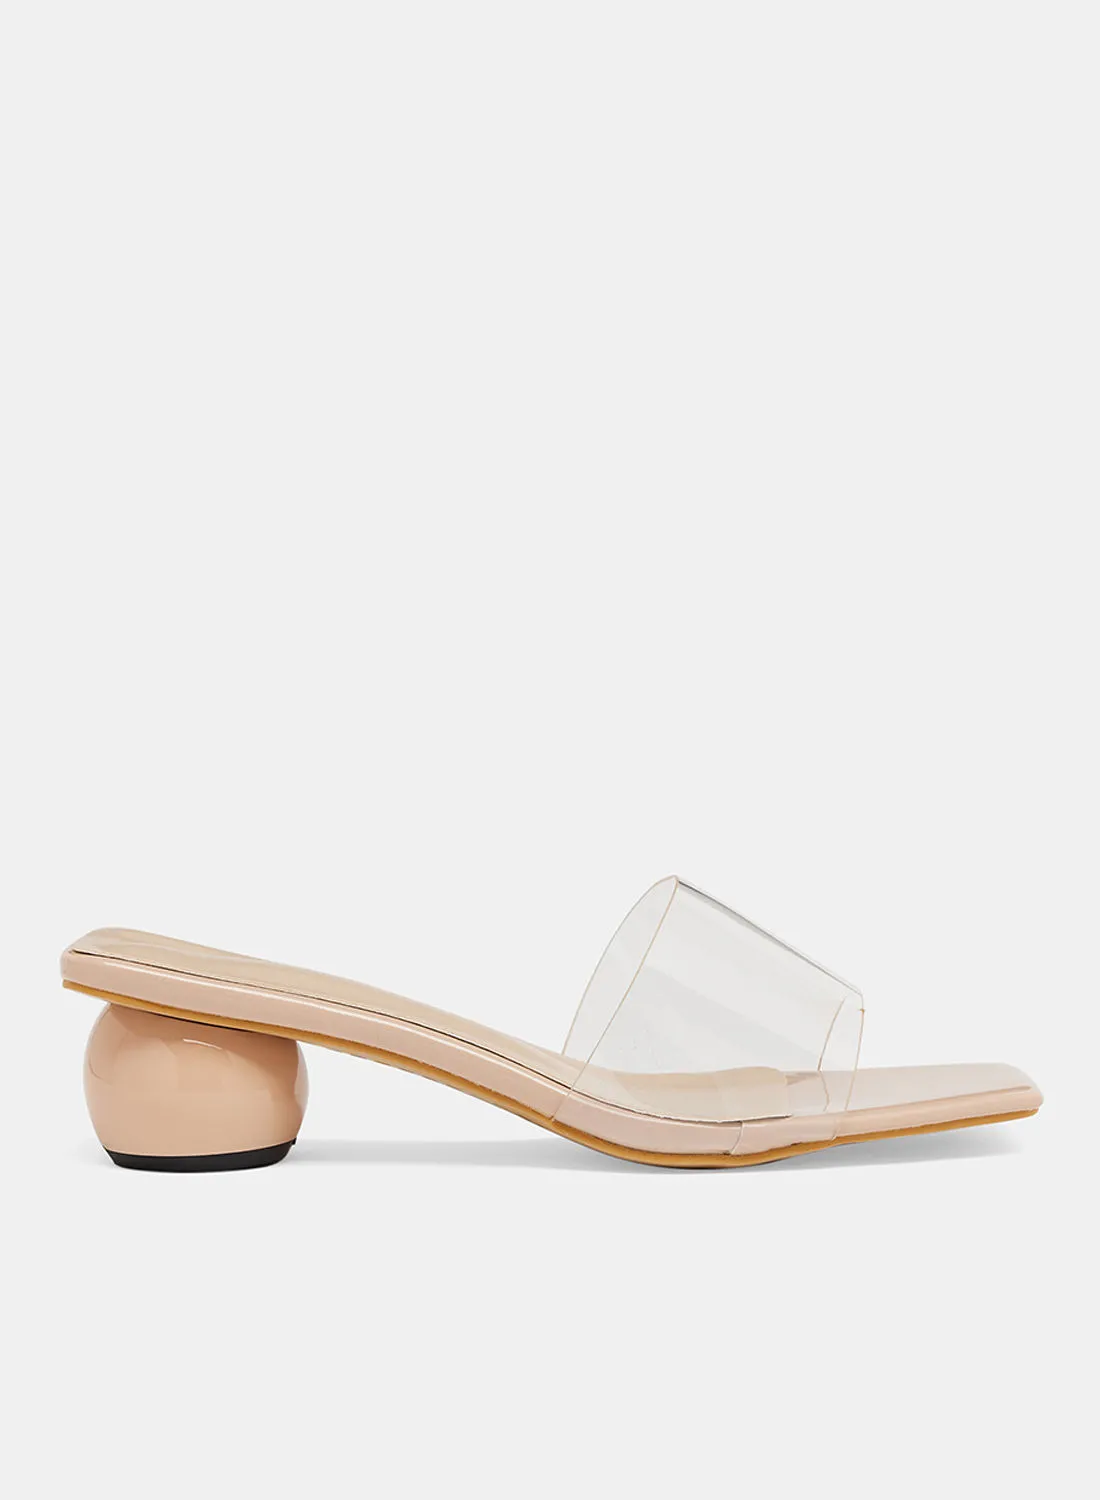 LABEL RAIL Clear Square Toe Sandals Pink